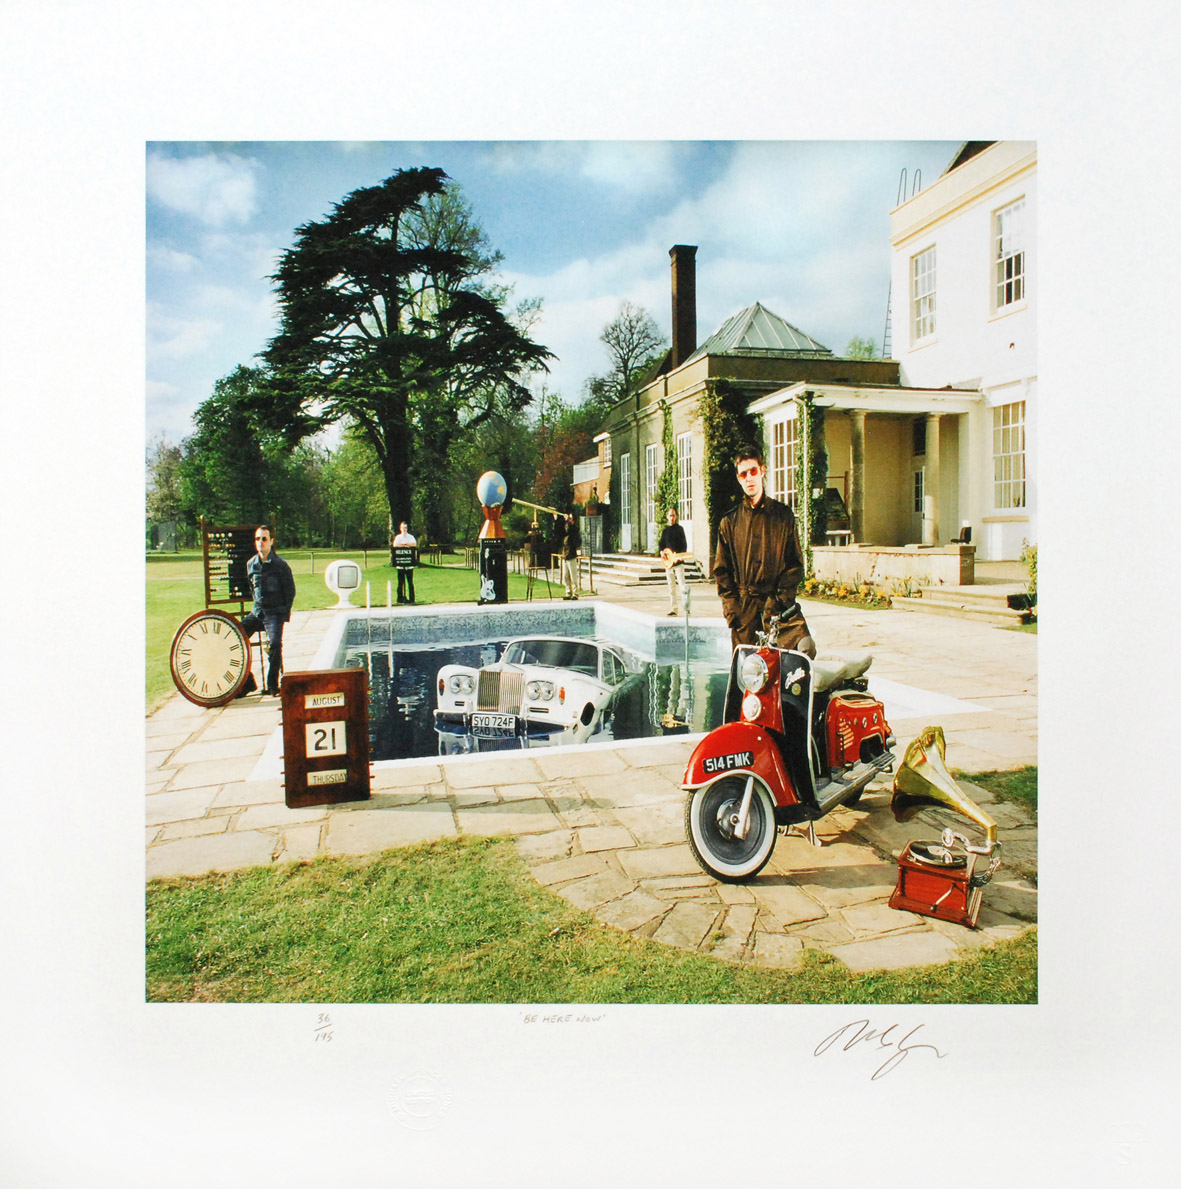 Michael Spencer Jones: Oasis - Be Here Now LP cover photograph (pair)